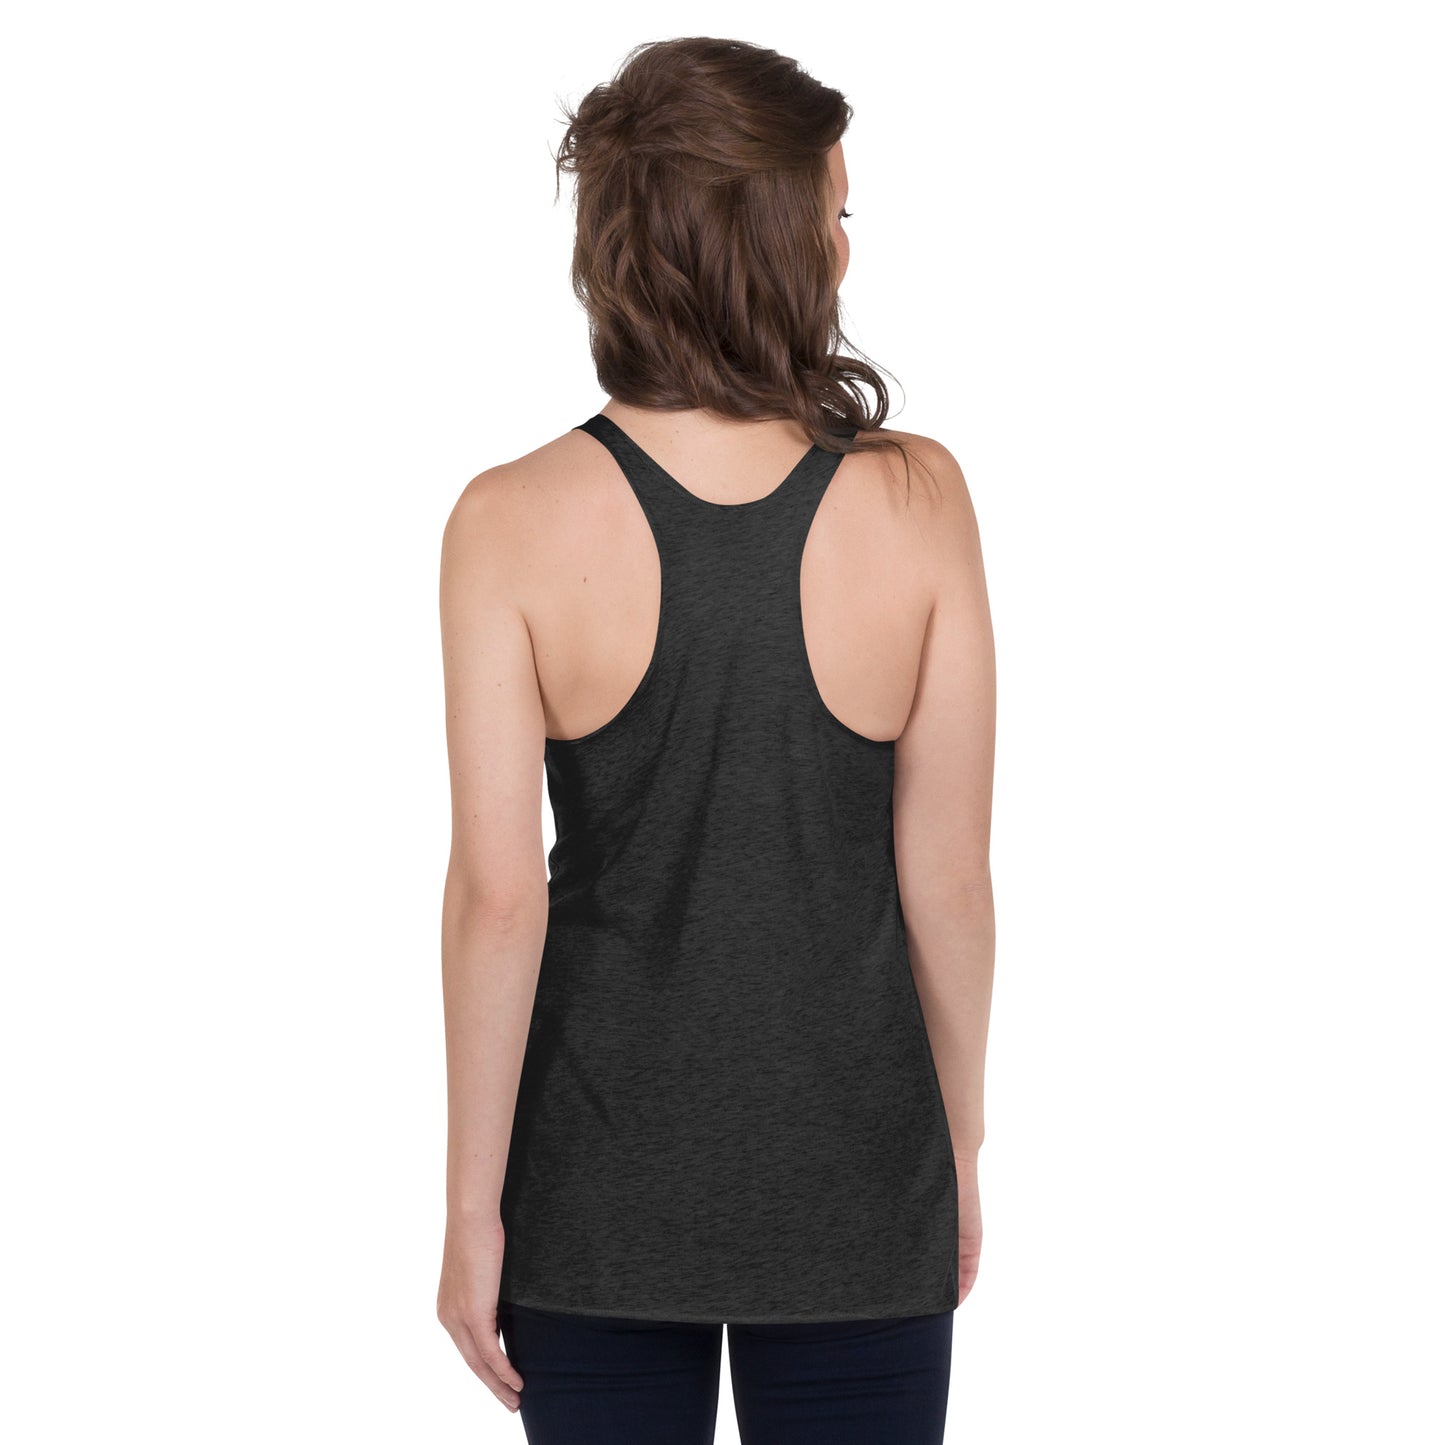 Land of the Free Home of the Brave UNCIVIL women's racerback Tank top, vintage black.